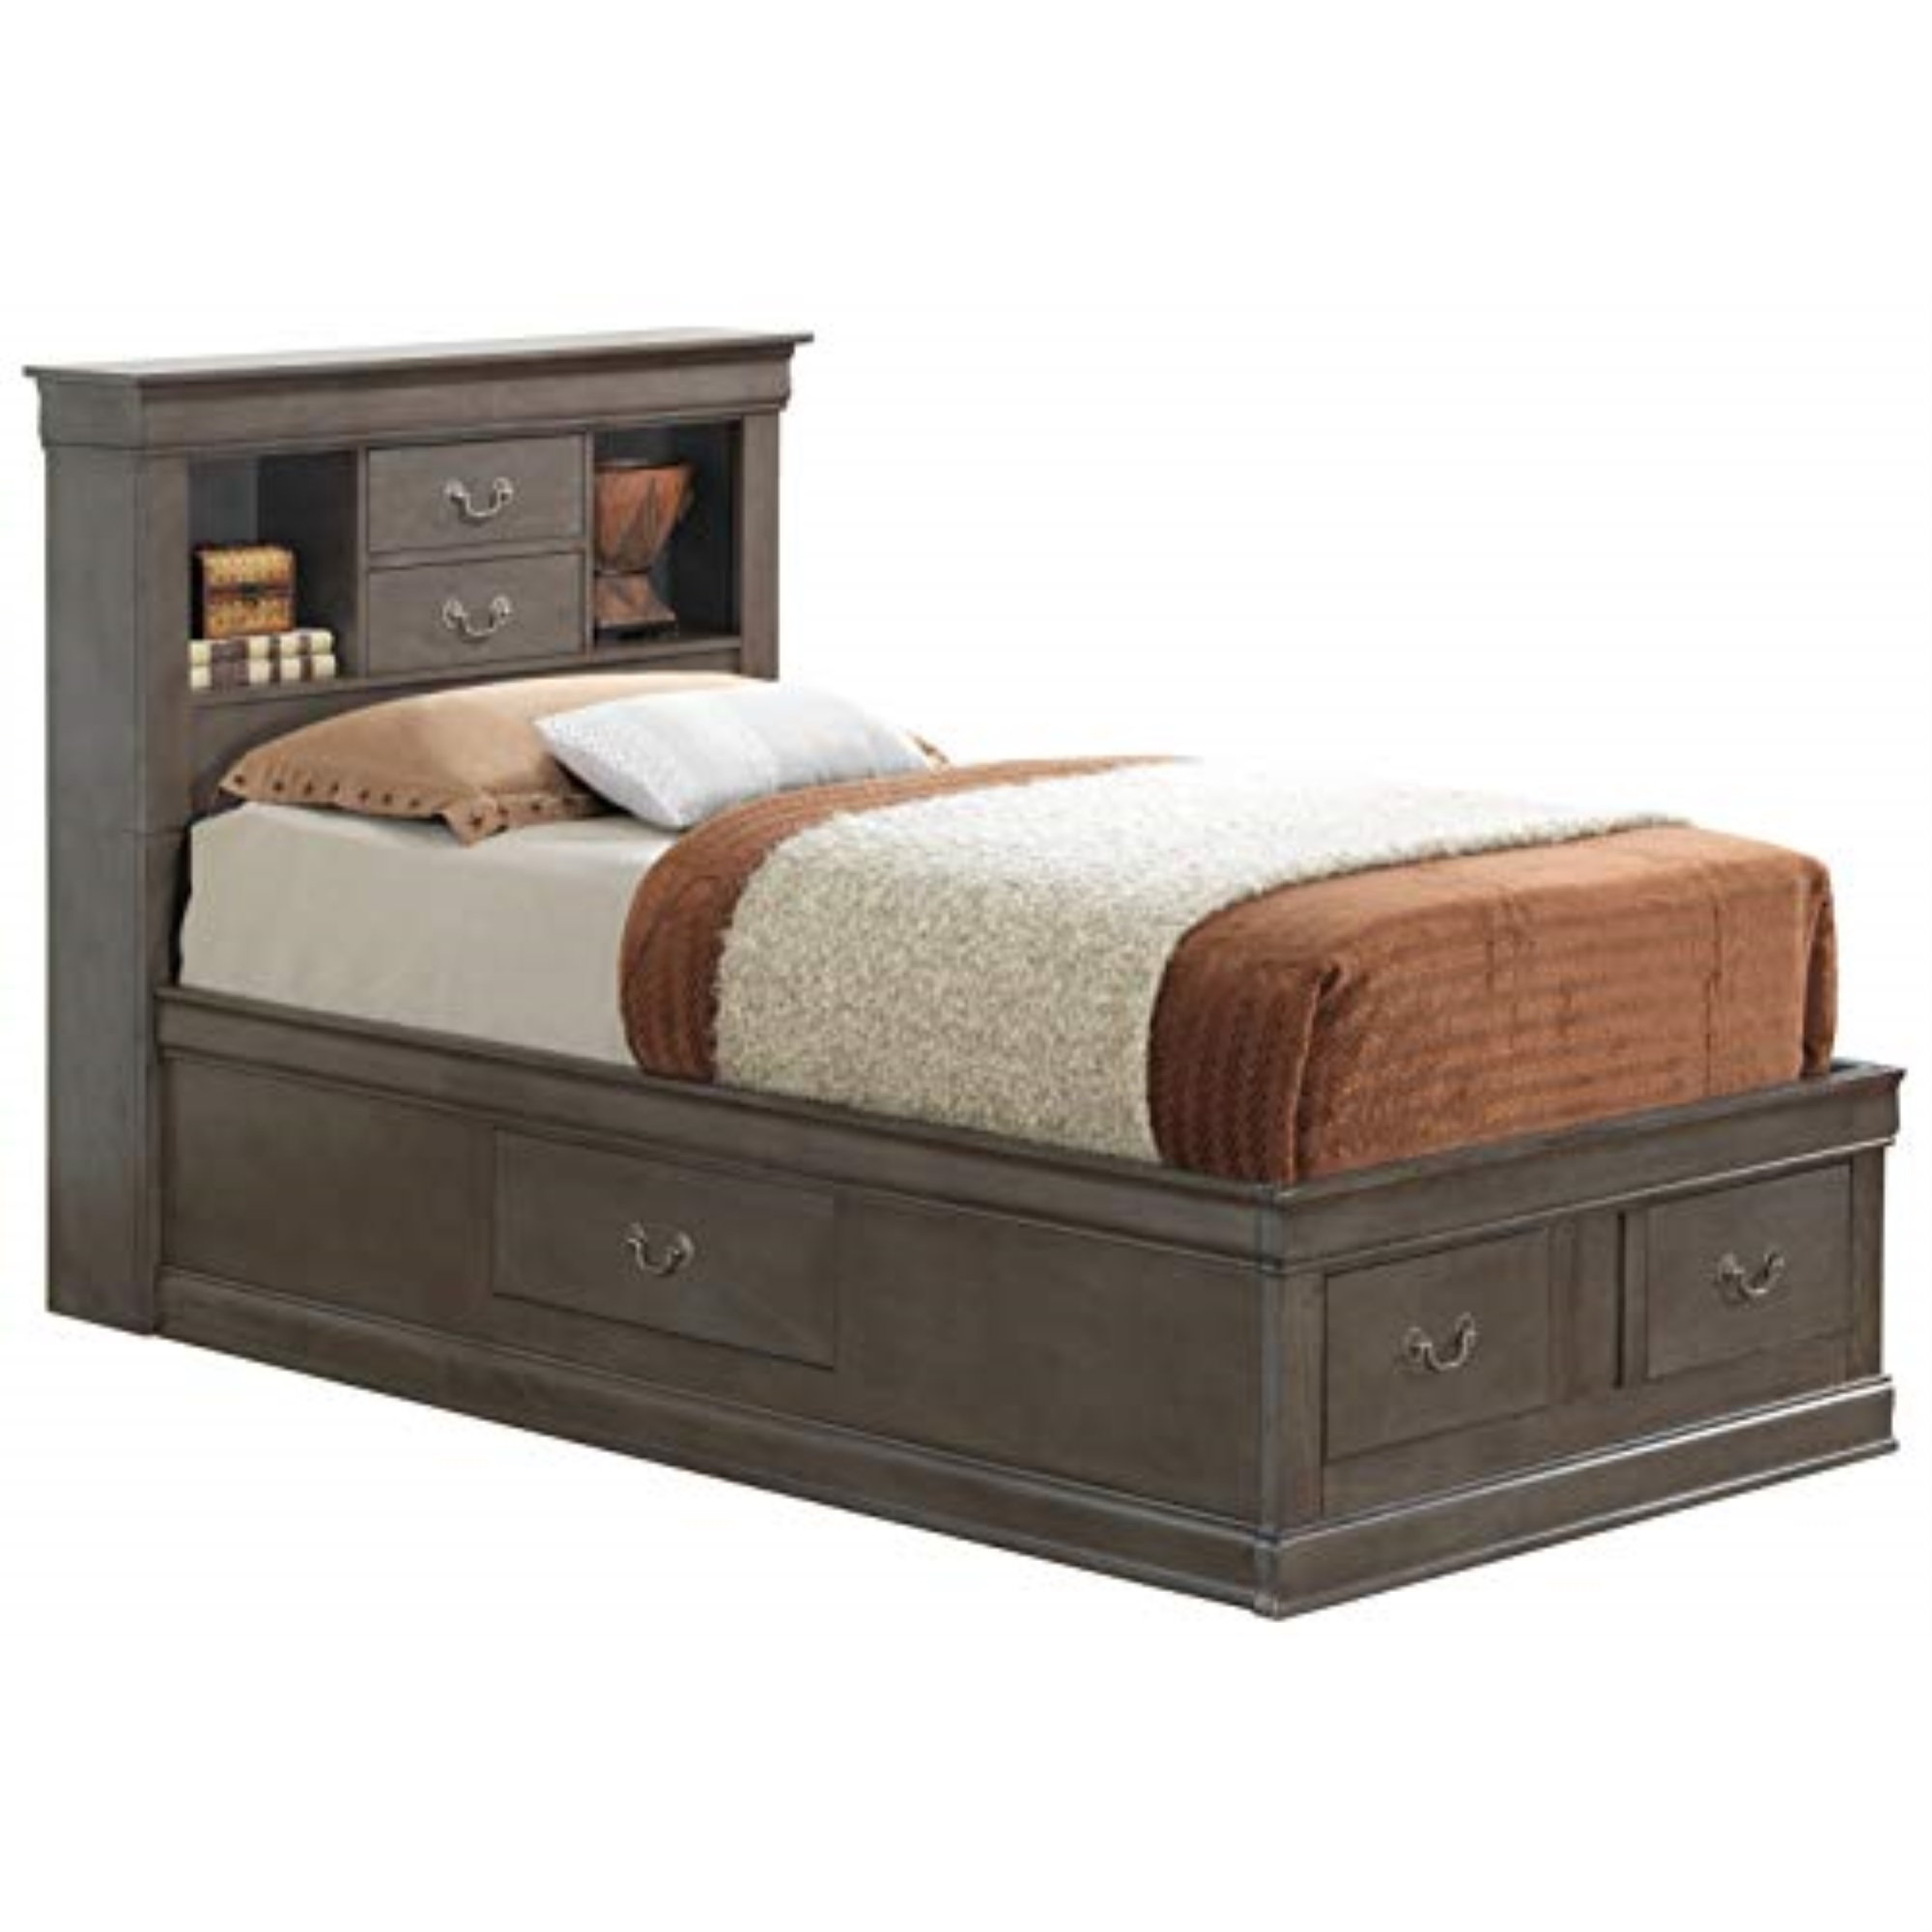 Glory Furniture Louis Phillipe King Panel Bed in Cherry